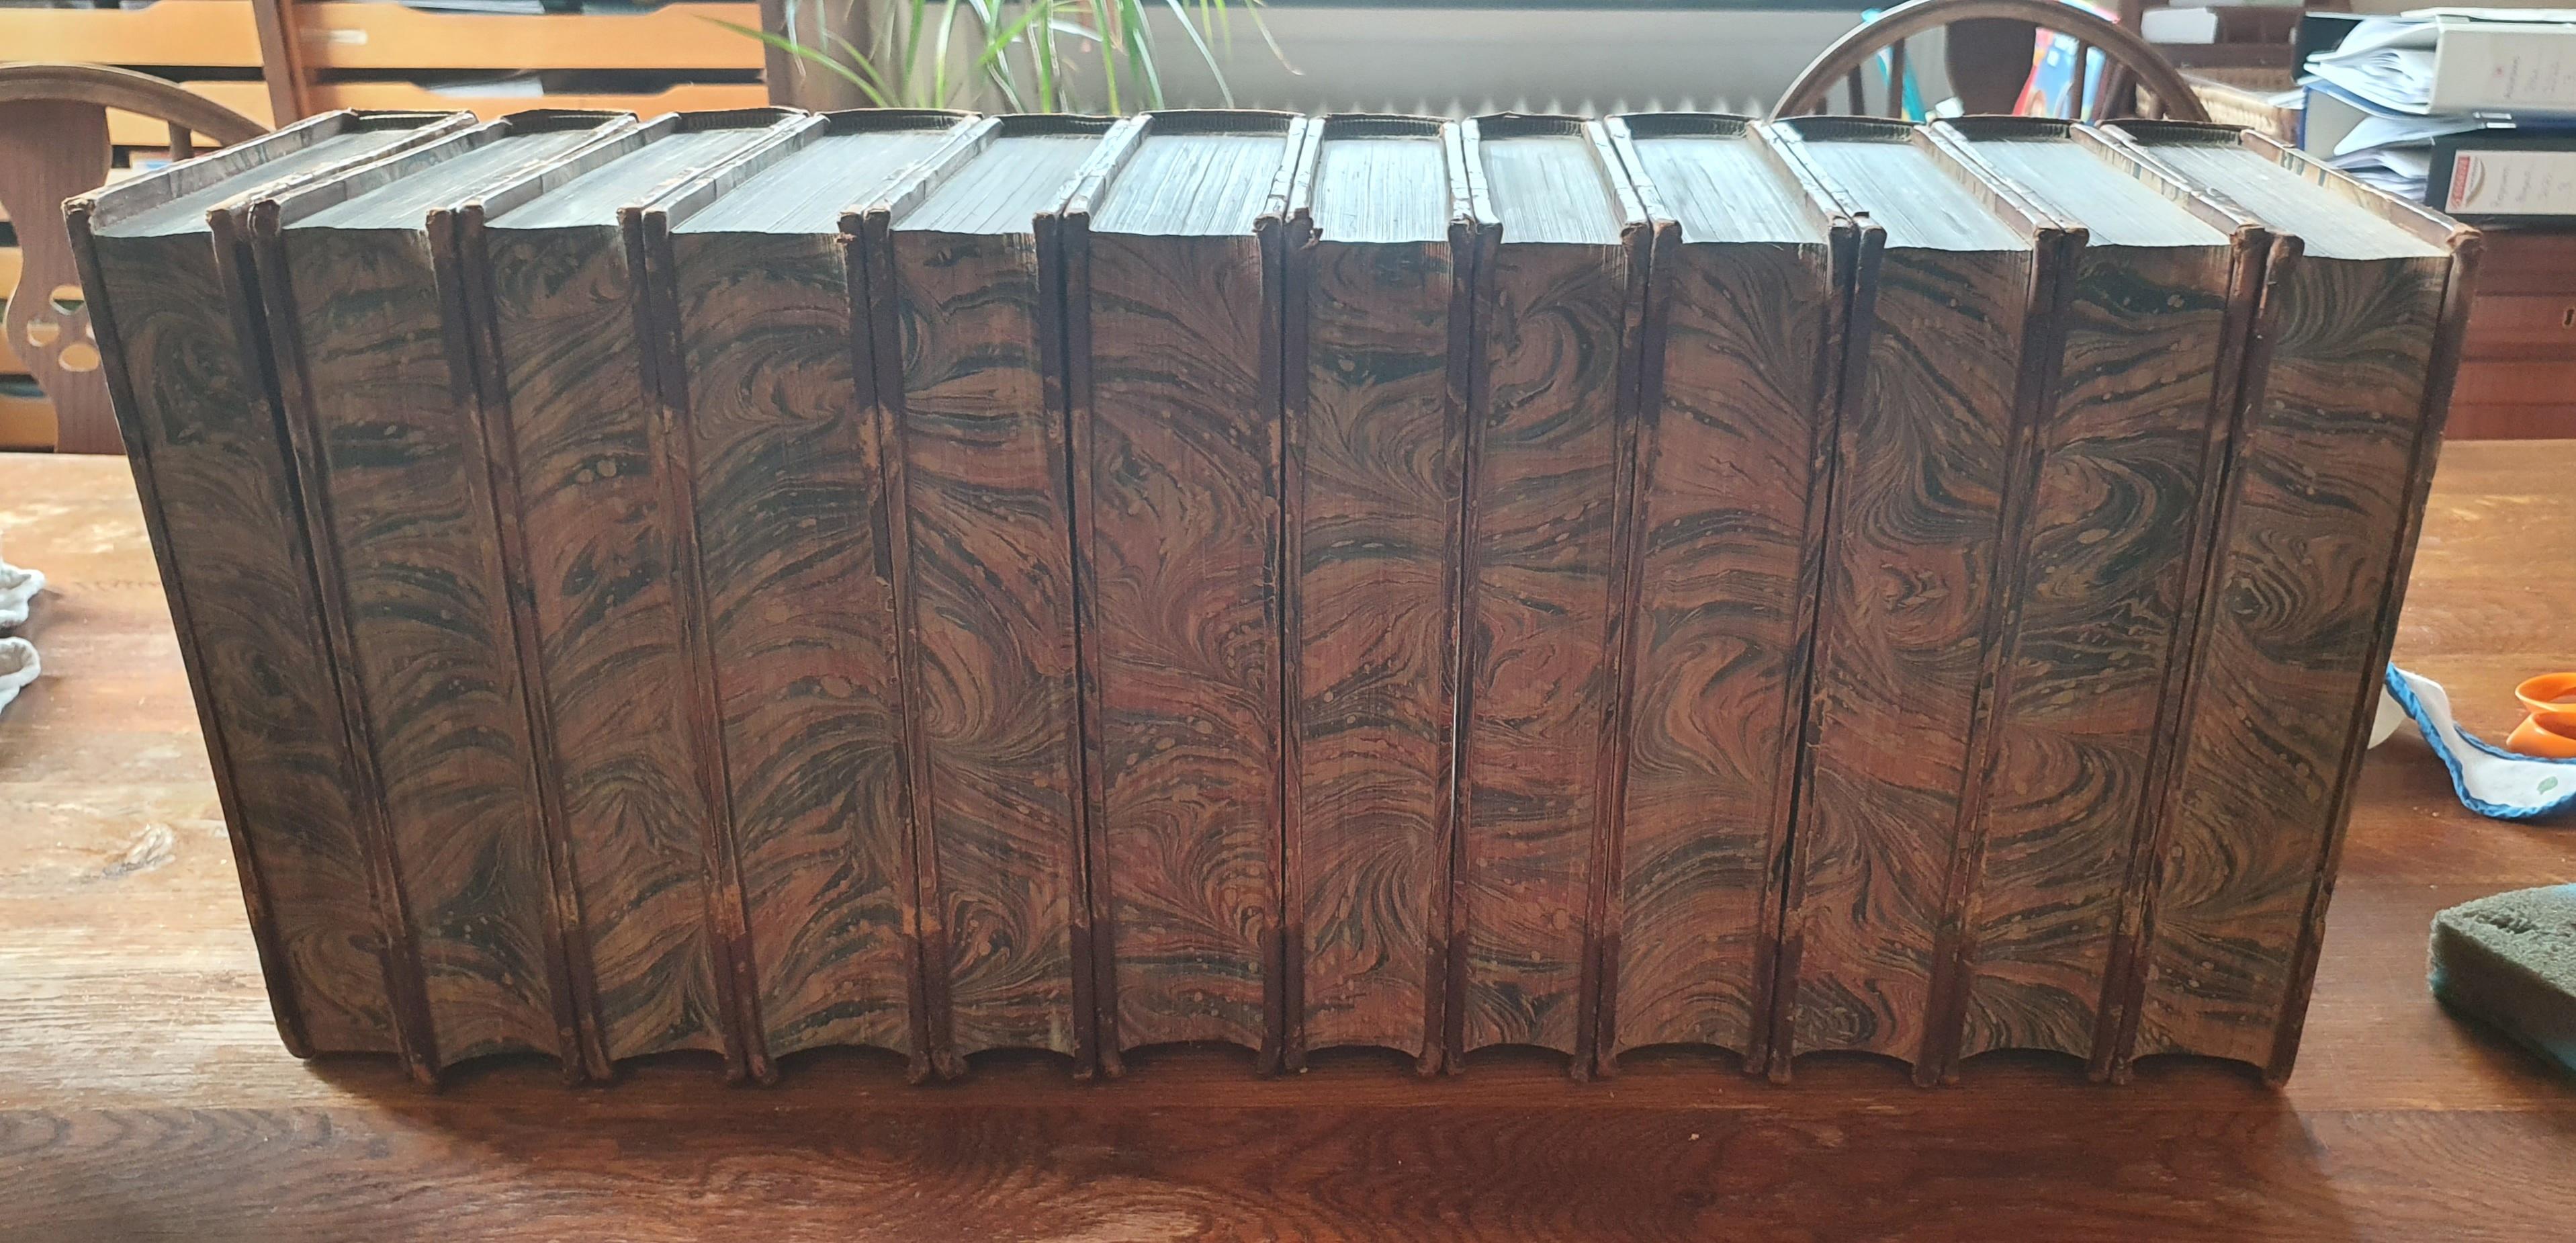 Complete 12 volume set of the Waverley Novels illustrated in the Abbotsford Edition. Leather over marbled paper boards. Raised bands, ornate gilt on spines, marbled edges. With illustrations throughout. 
For condition of the books, see description